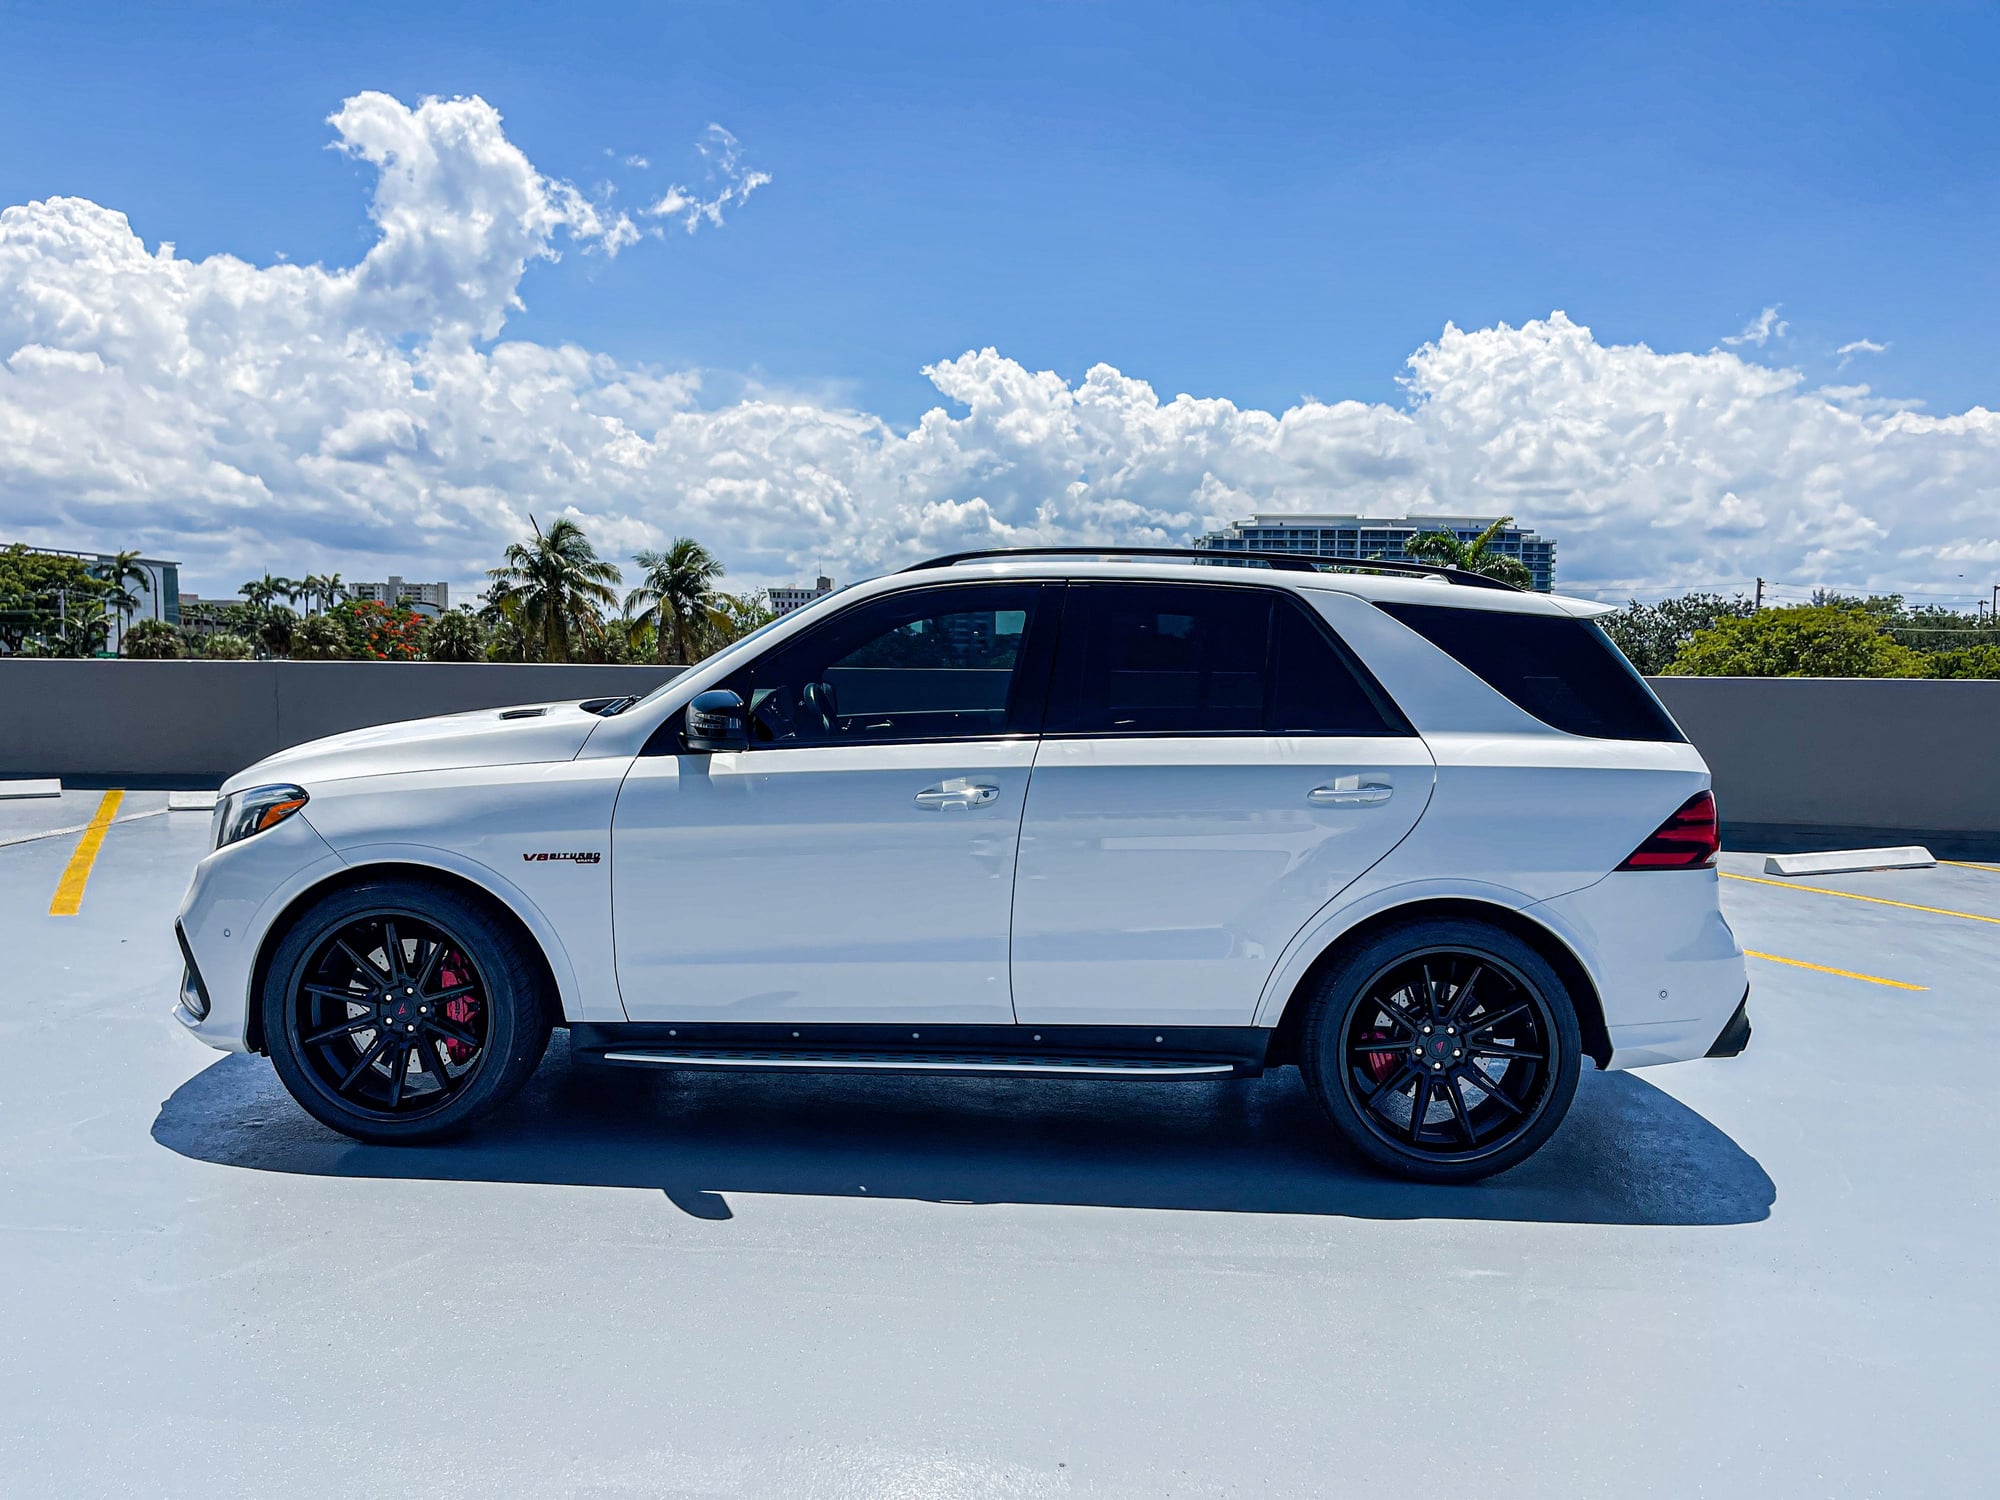 2016 Mercedes-Benz GLE63 AMG S - FS 2016 GLE63s w/ Bumper to Bumper Warranty - Used - Fort Lauderdale, FL 33304, United States